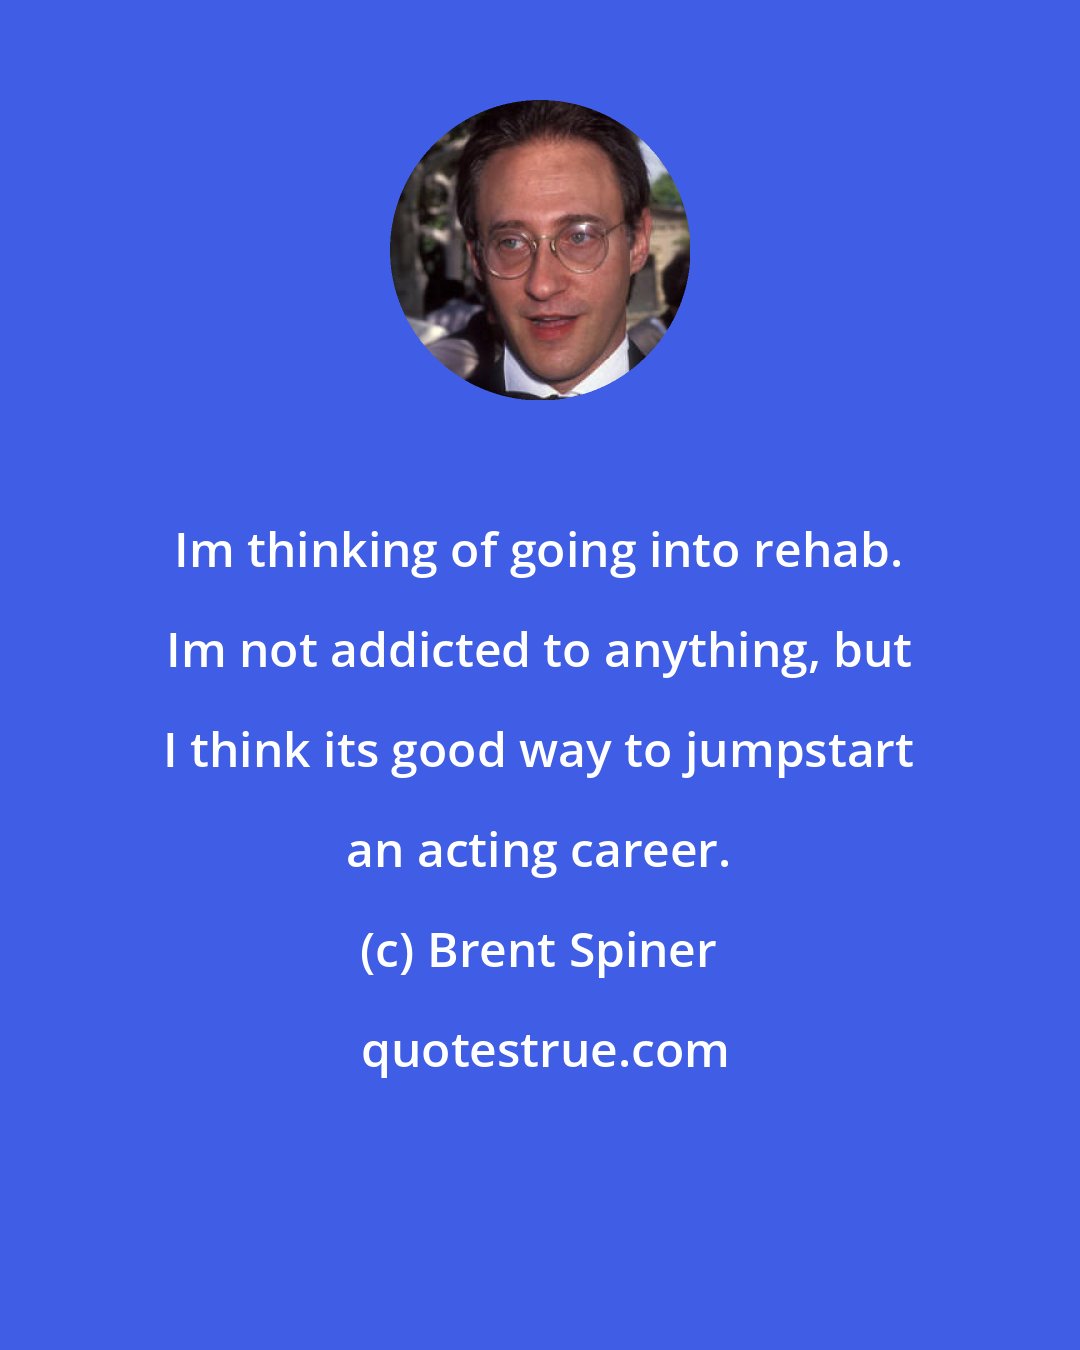 Brent Spiner: Im thinking of going into rehab. Im not addicted to anything, but I think its good way to jumpstart an acting career.